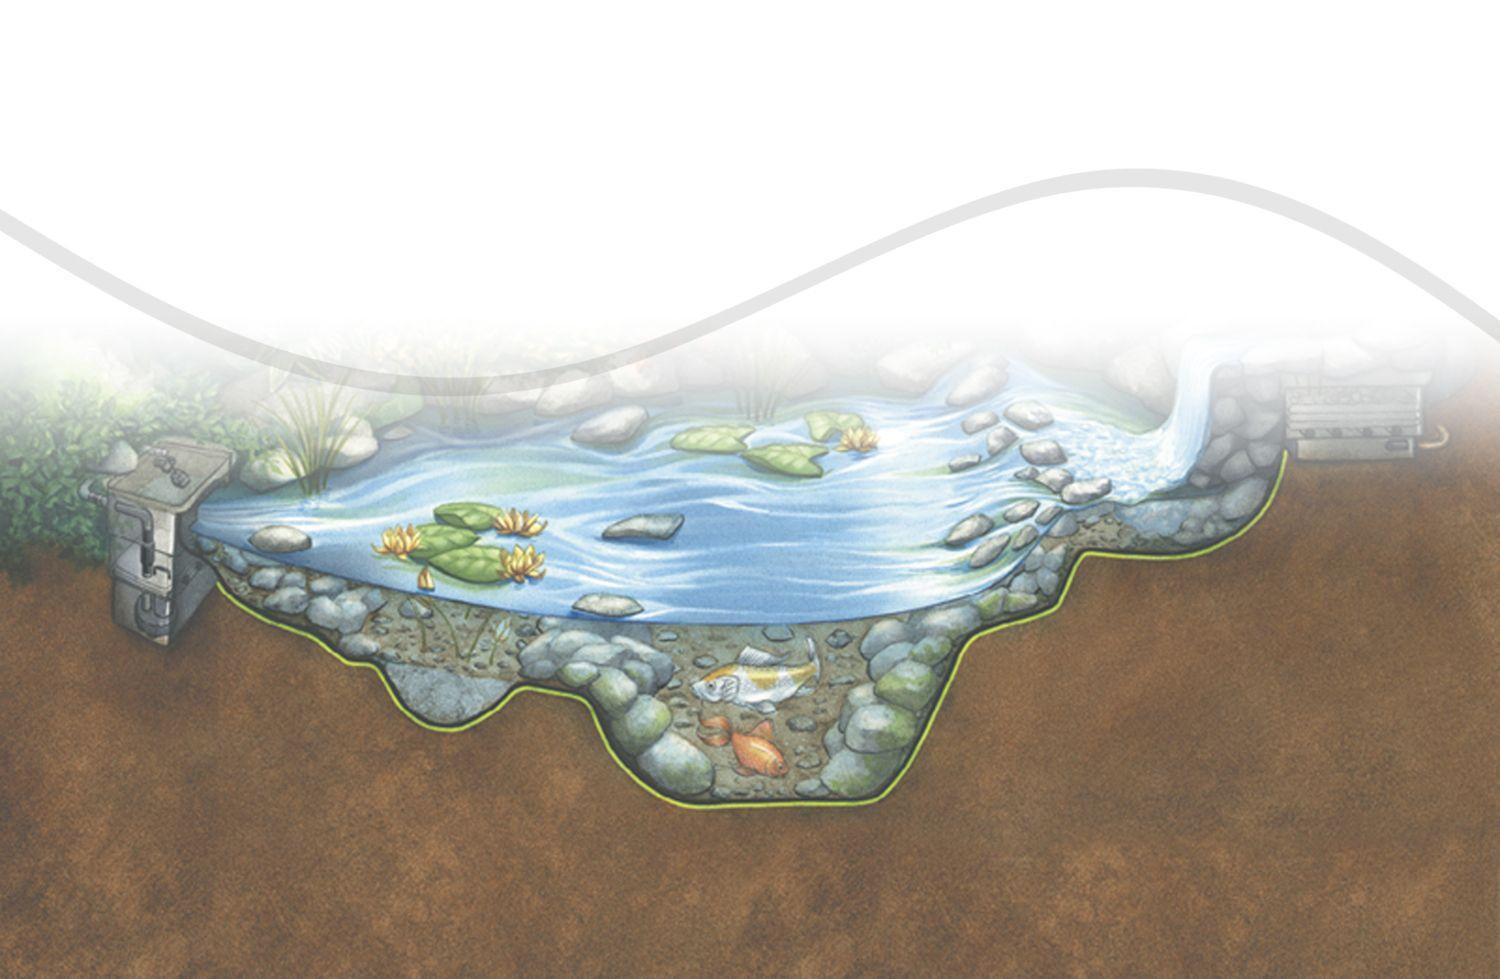 Aquascape Ecosystem Background For PowerPoint PPT